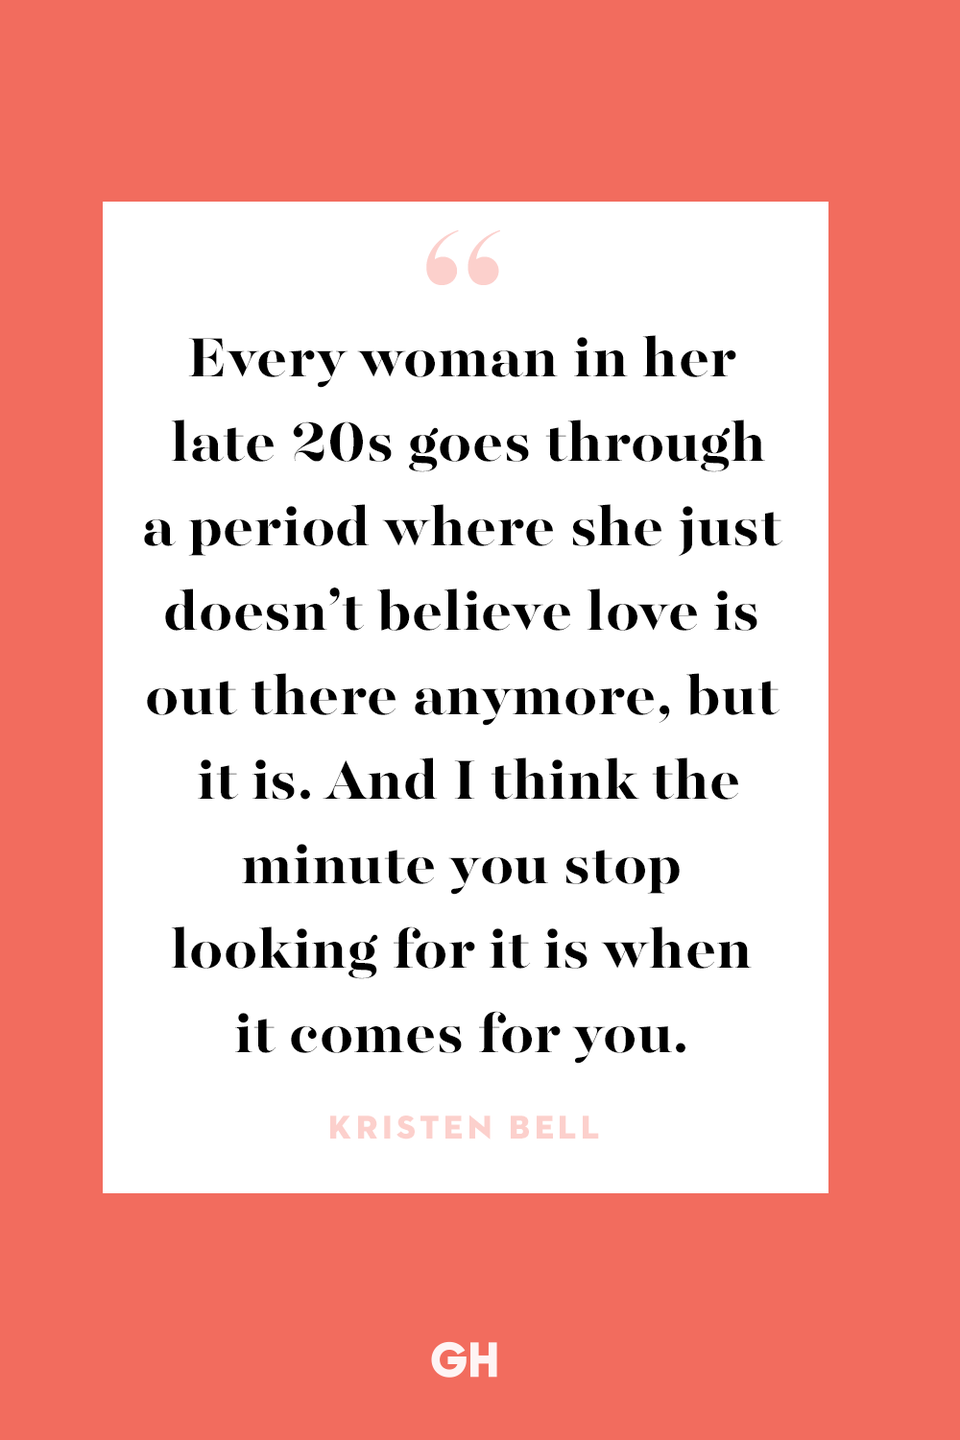 <p>Every woman in her late 20s goes through a period where she just doesn’t believe love is out there anymore, but it is. And I think the minute you stop looking for it is when it comes for you.</p>